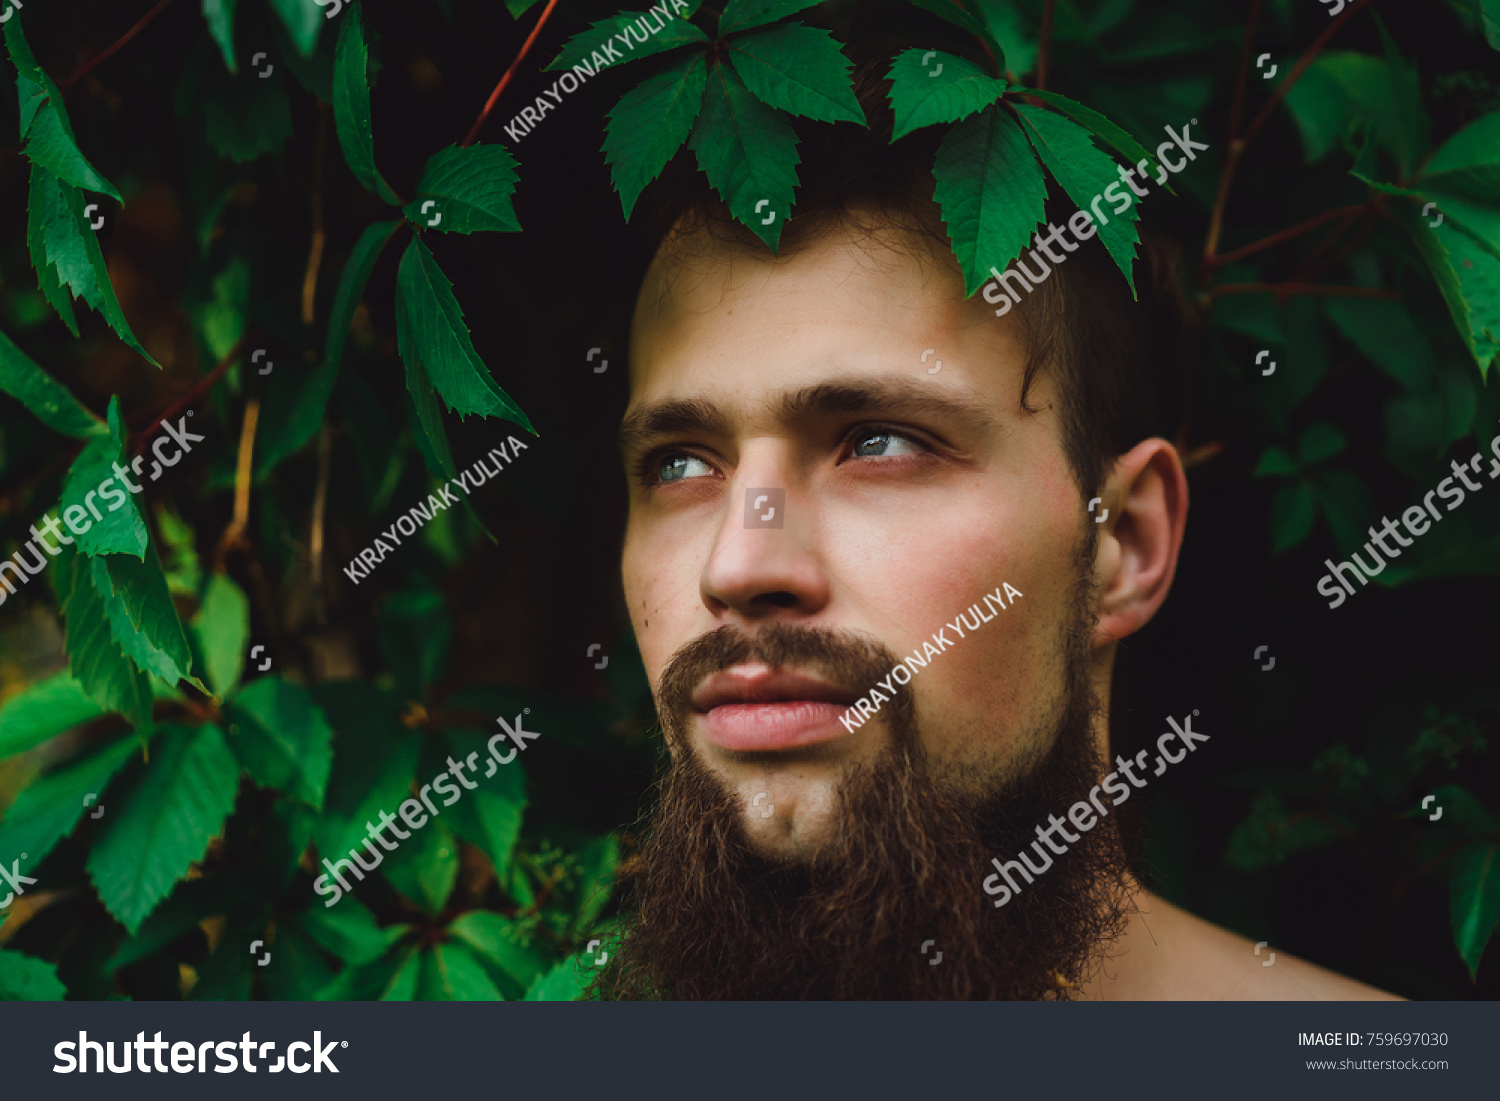 portrait of a handsome man on green summer leaves. Fashion Brunette man with blue eyes, Portrait in wild leaves (grapes), natural background. #759697030